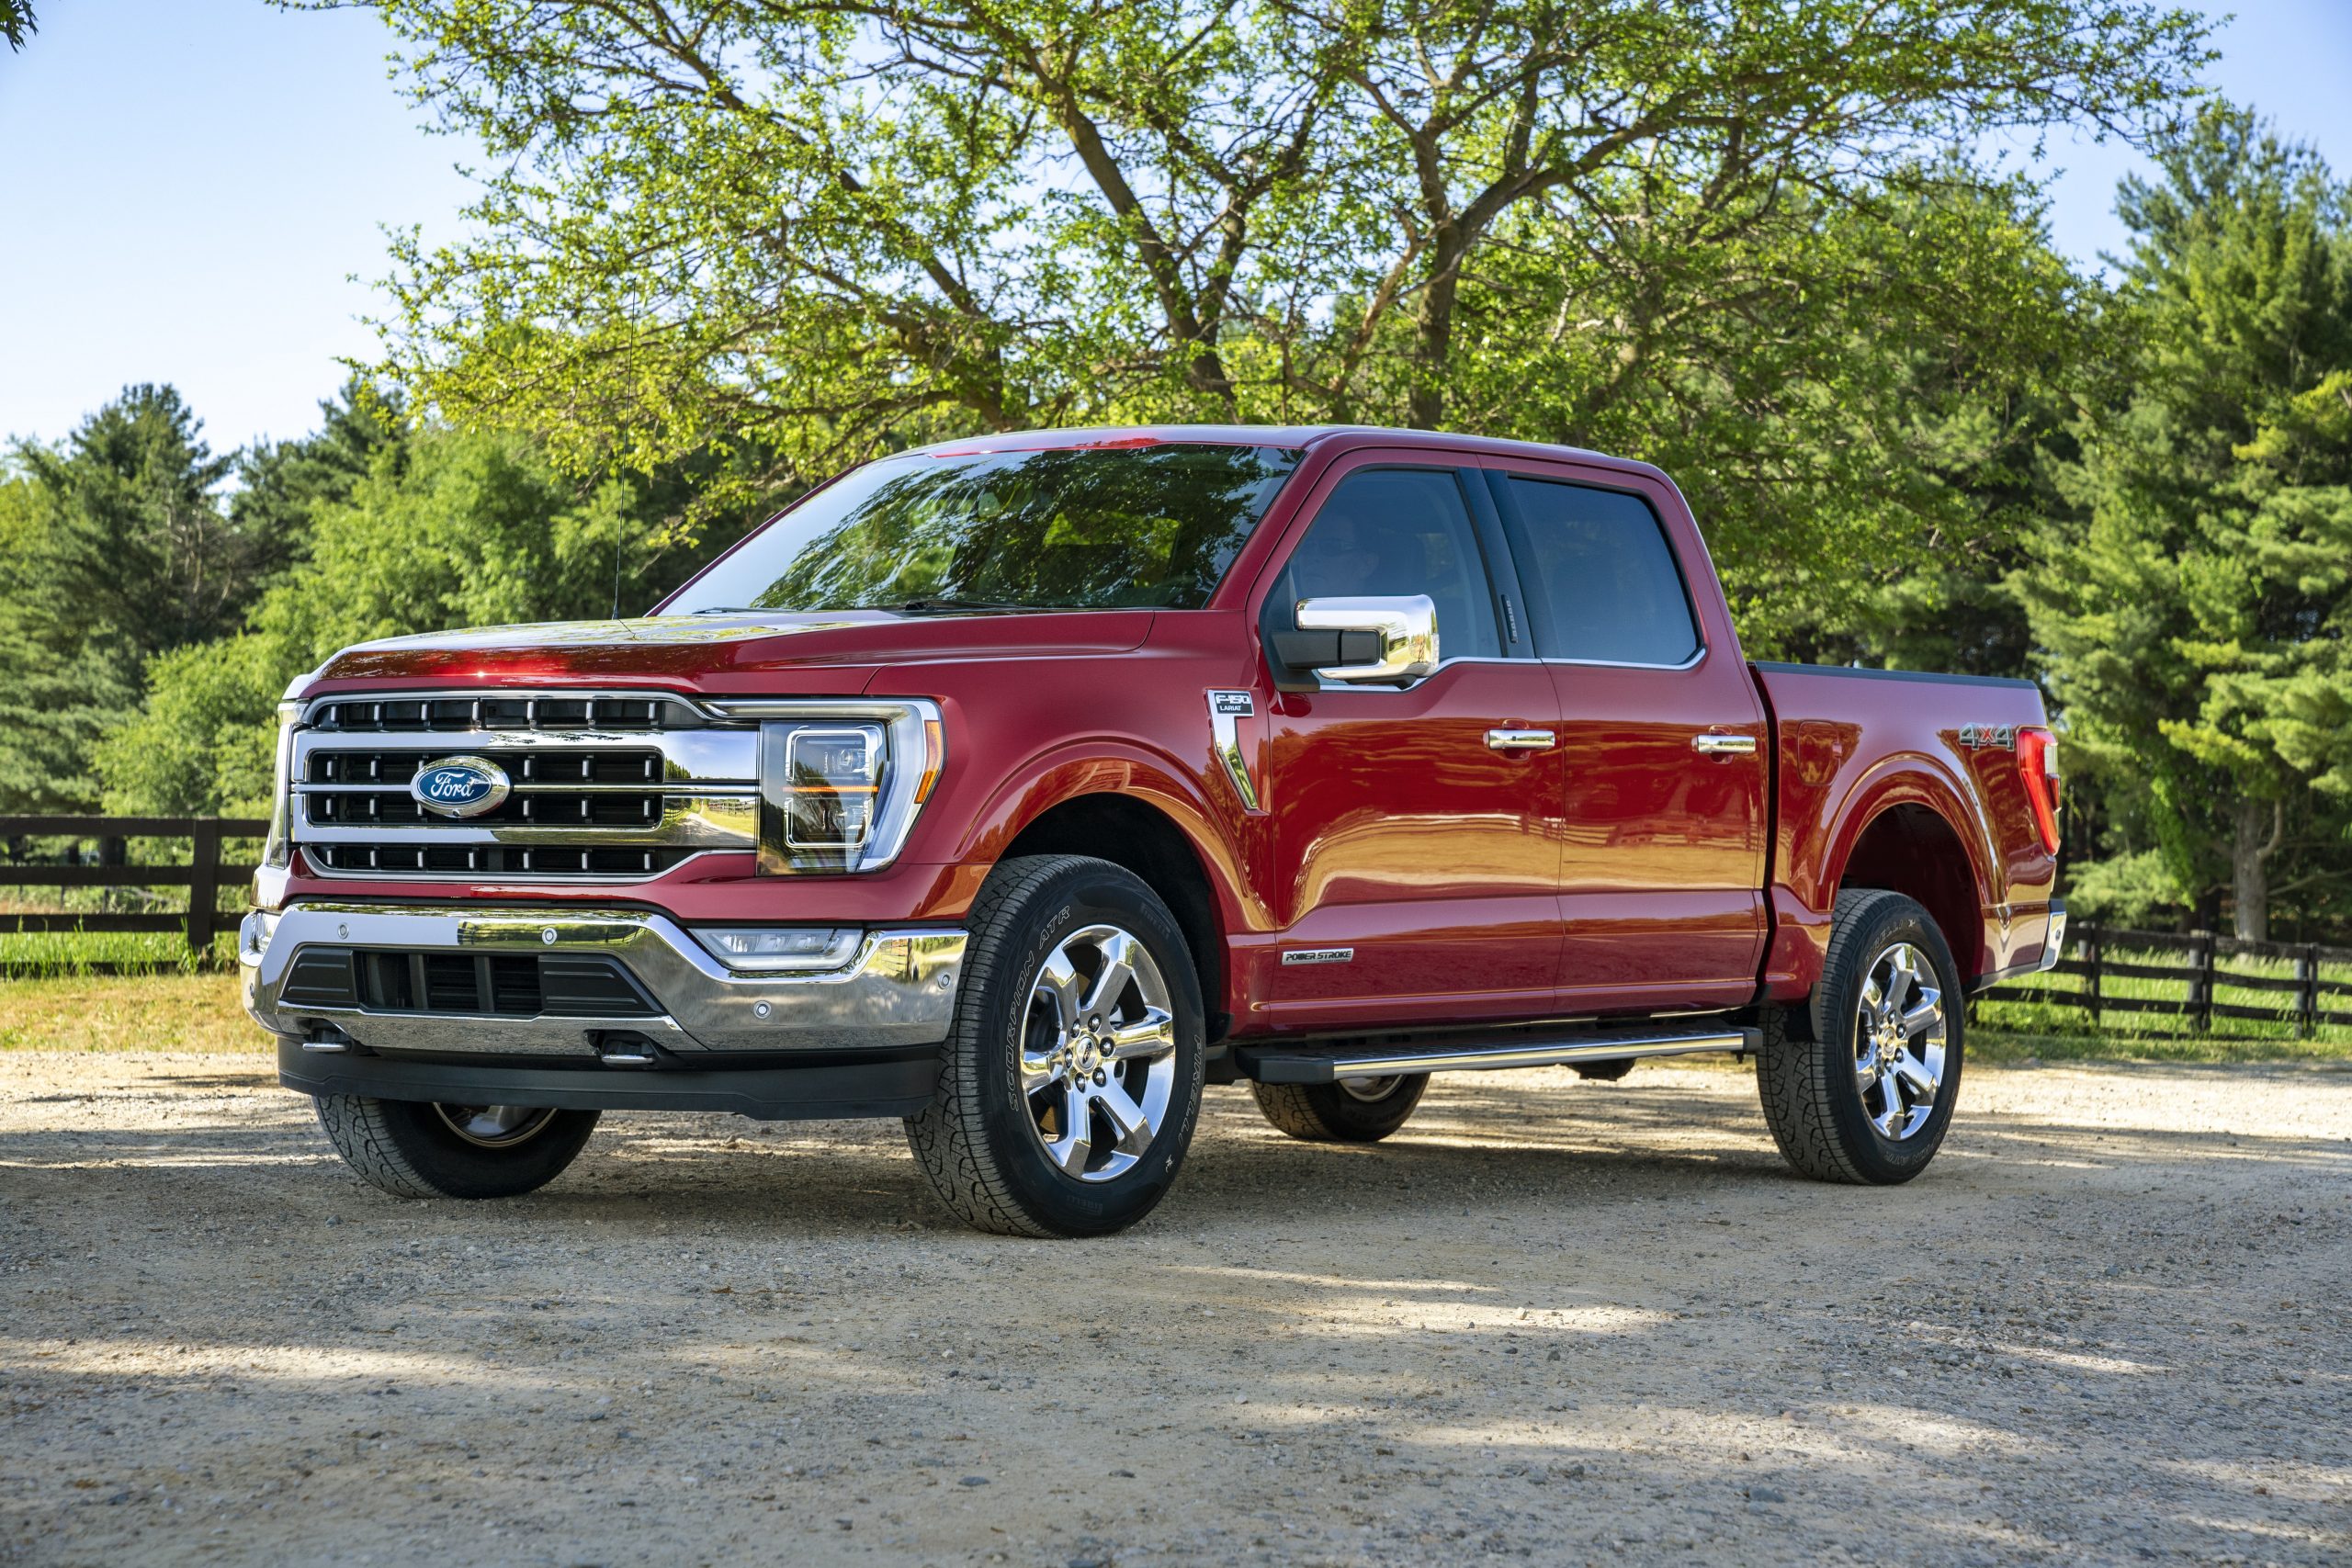 See how this 2022 Ford F-150 Lariat compares to the Ram 1500 Laramie | Ford Motor Company